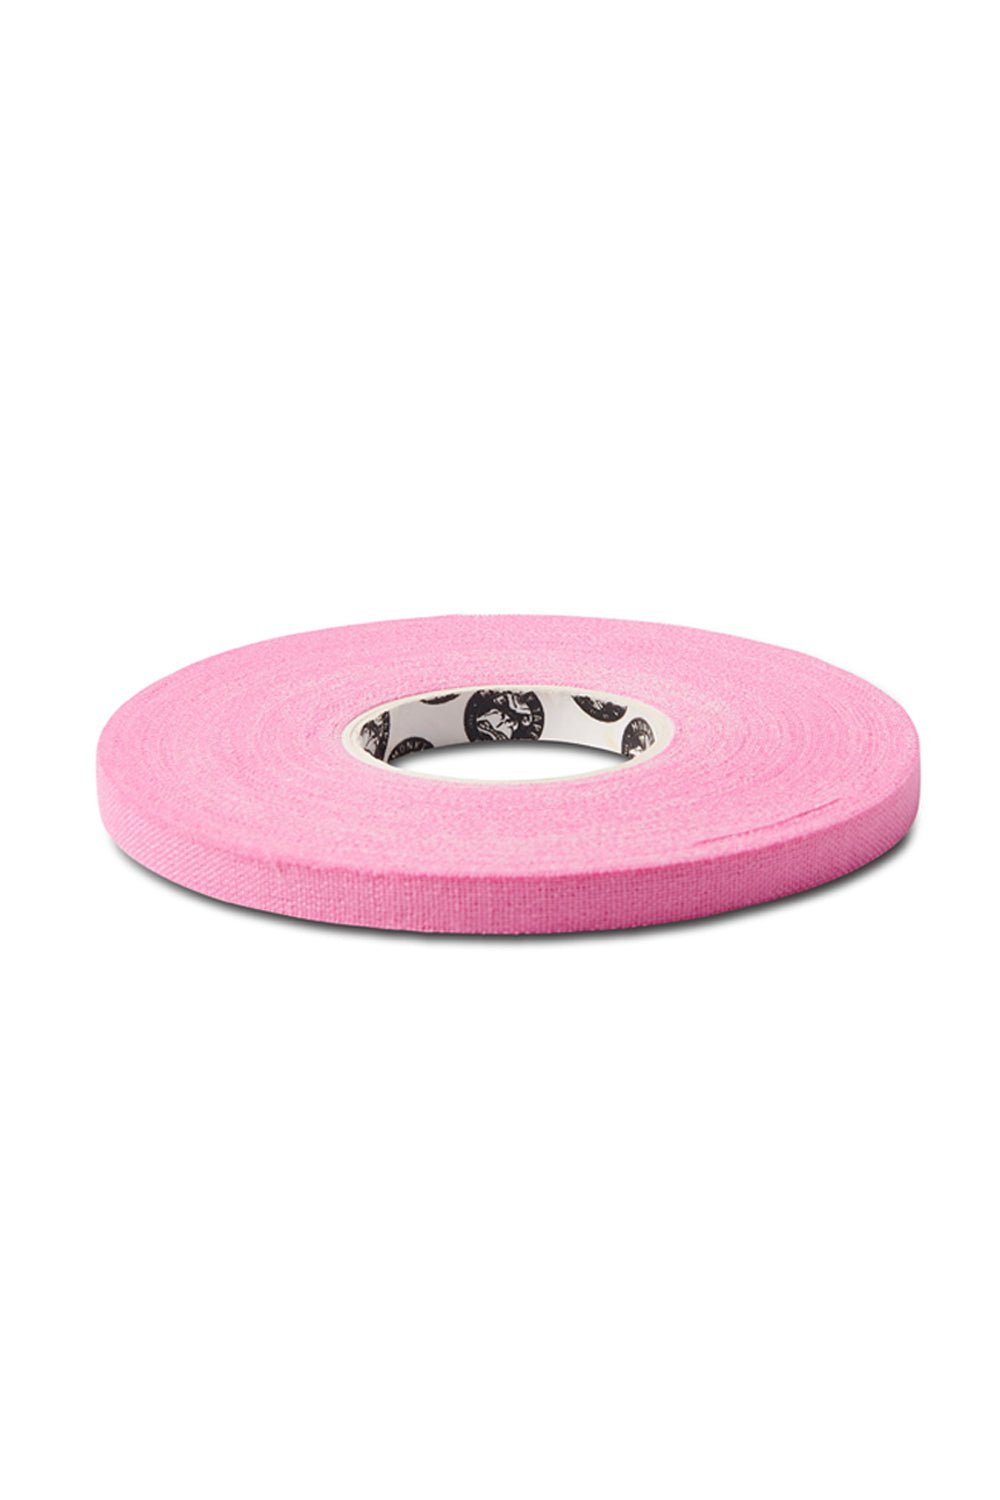 Gracie Barra Finger Tape Tin by Monkey Tape - Pink